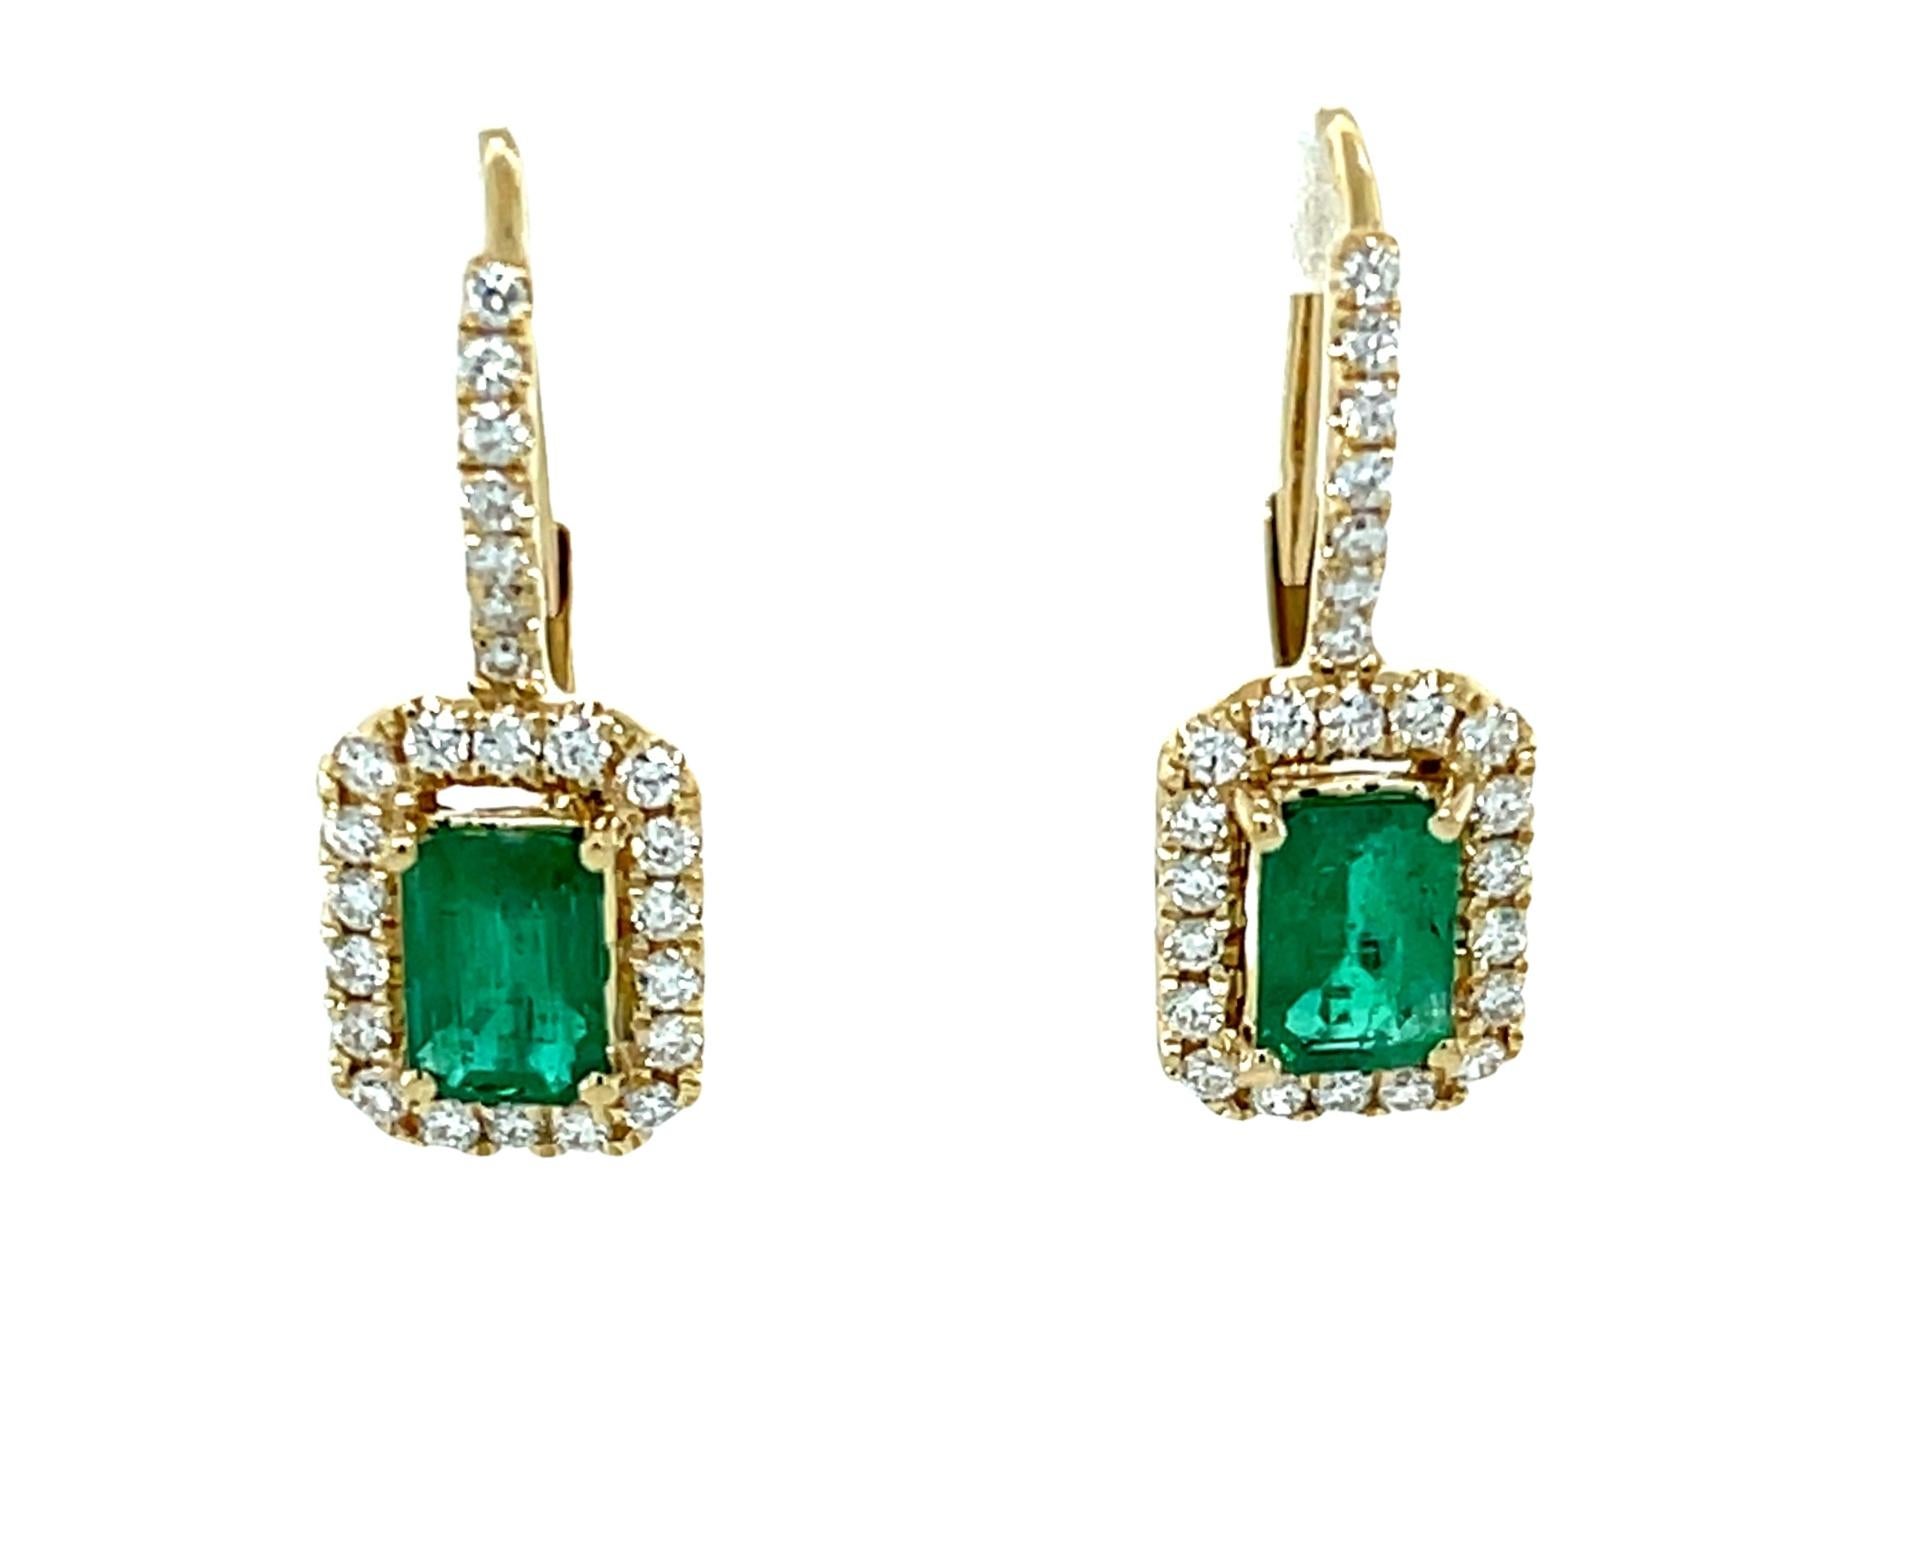 These gorgeous rectangular drop earrings feature a beautifully matched pair of rich, green emeralds framed by a sparkling halo of brilliant white diamonds! The emeralds weigh .98 carat total and are fine quality, clean and a lovely shade of emerald